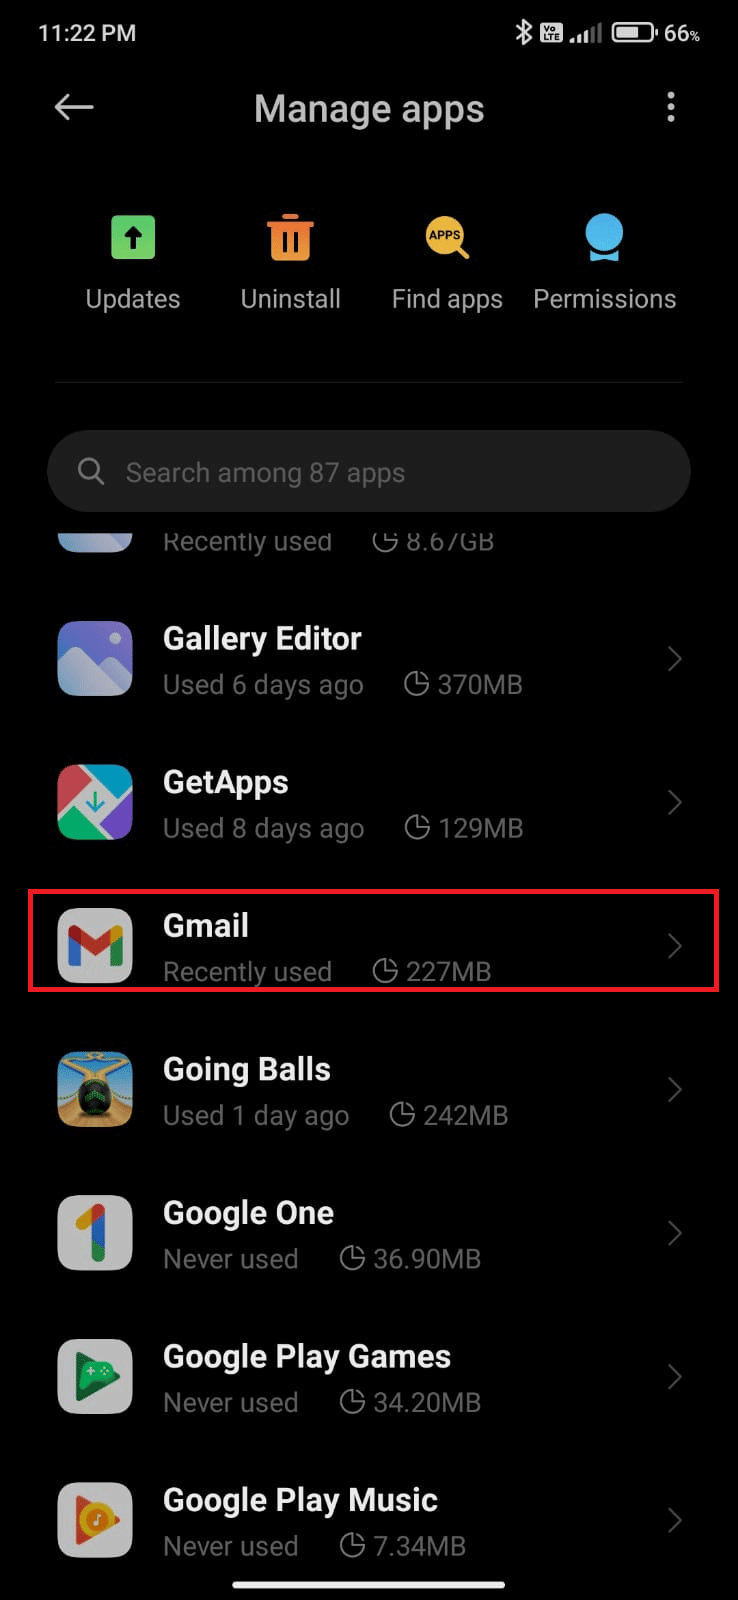 Then, tap on Manage apps and then Gmail 